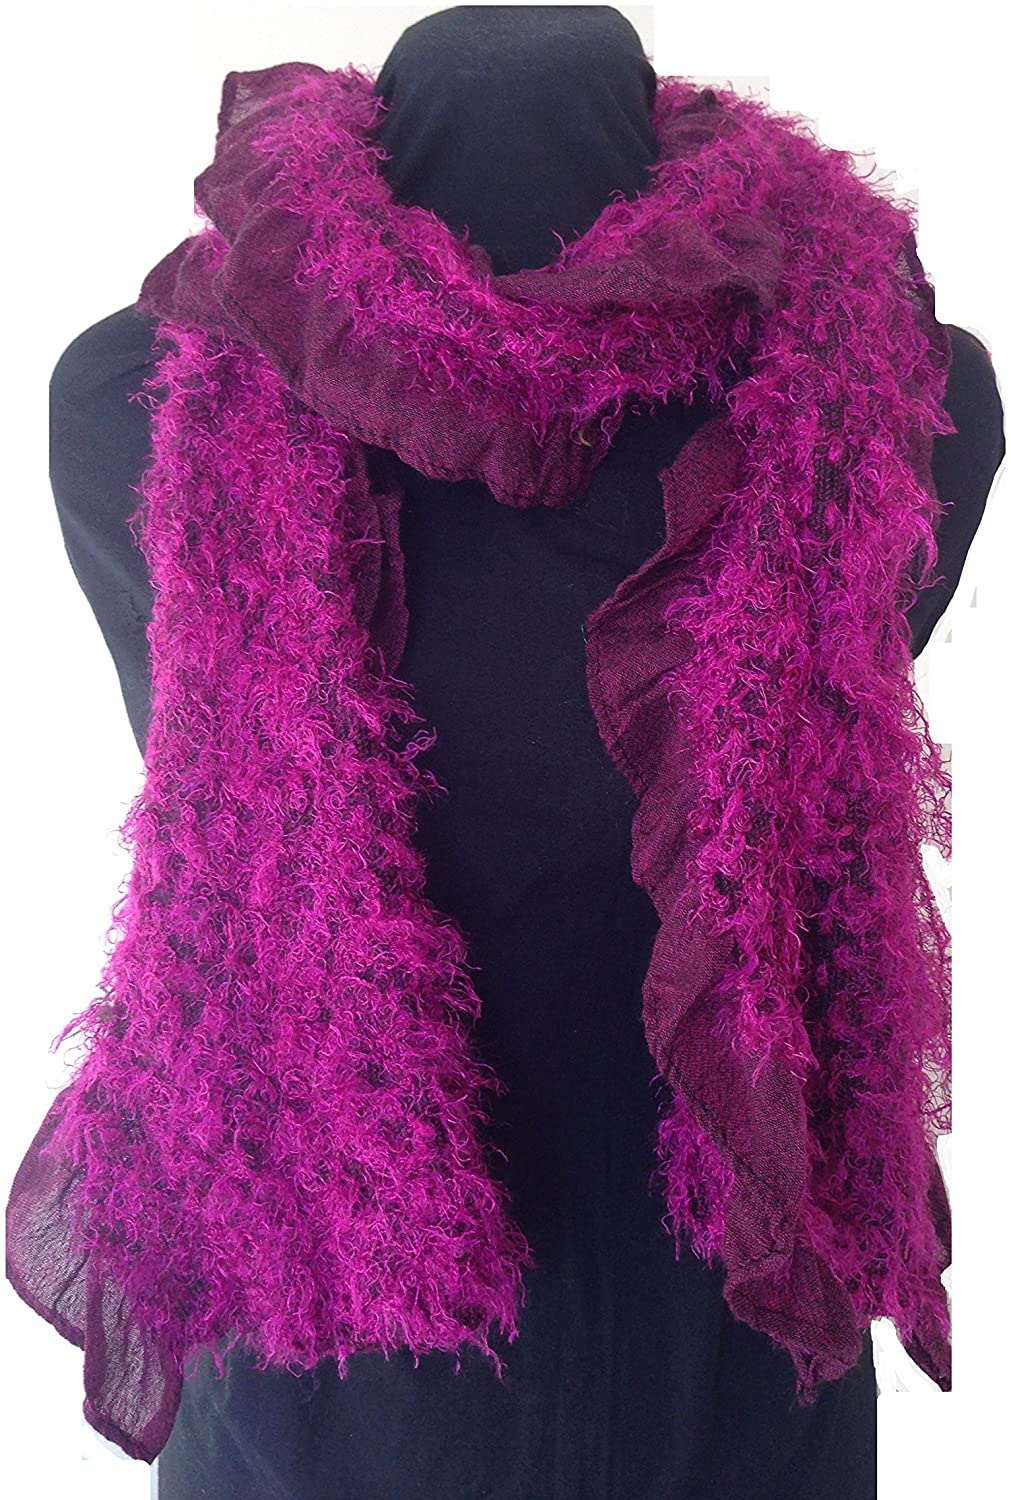 Pamper Yourself Now Bright Pink Warm Fluffy Winter Ladies Scarf